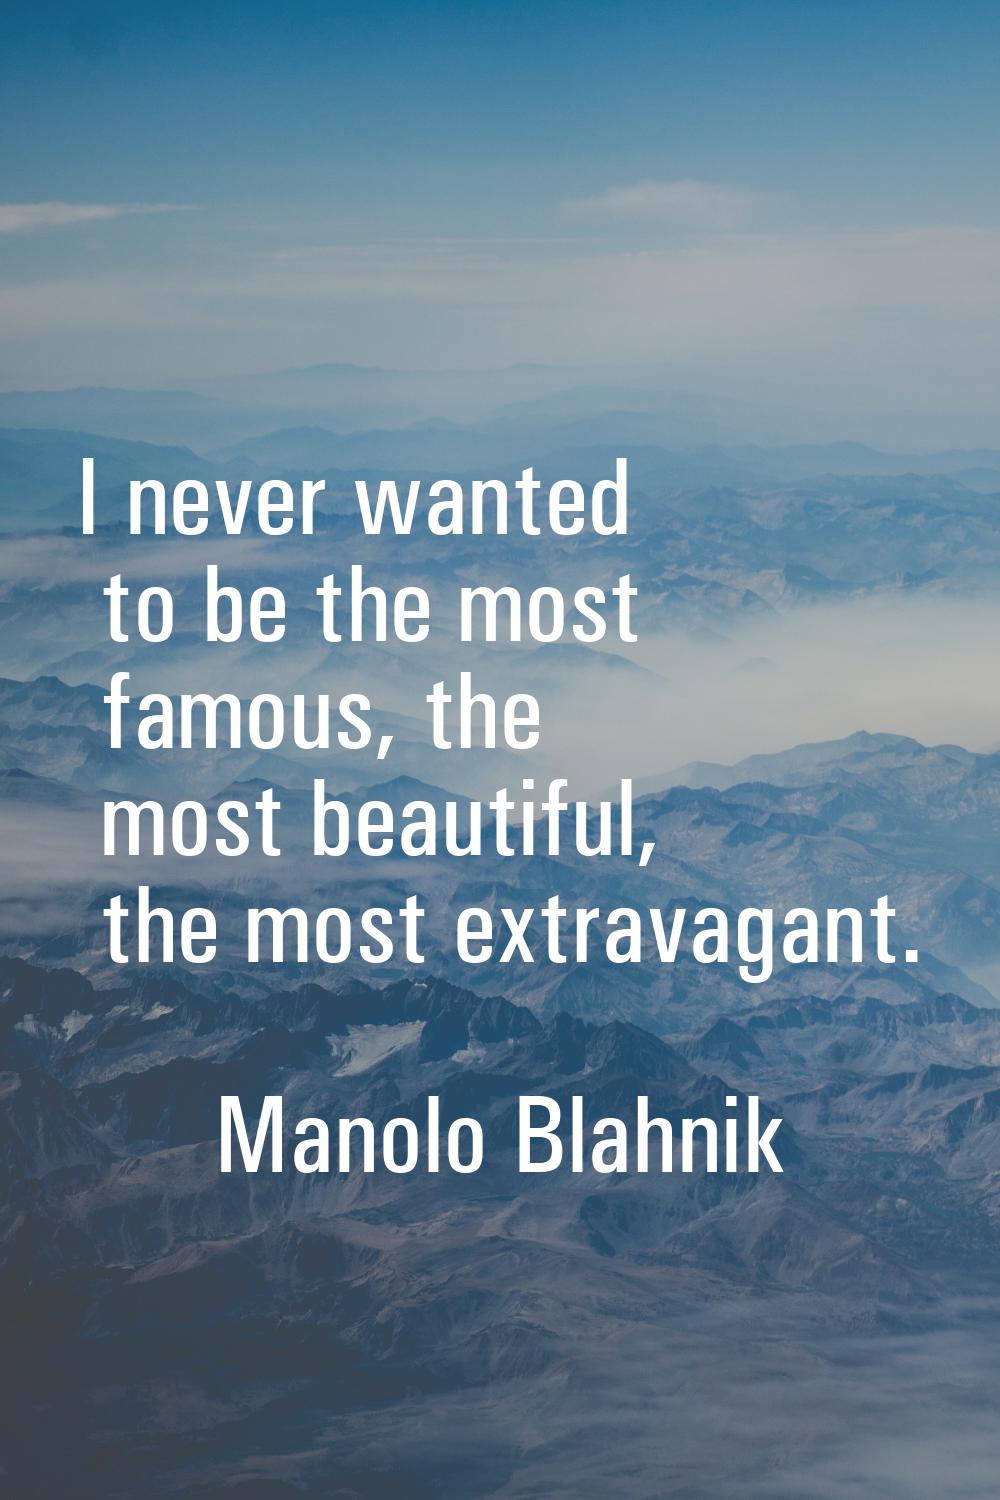 I never wanted to be the most famous, the most beautiful, the most extravagant.